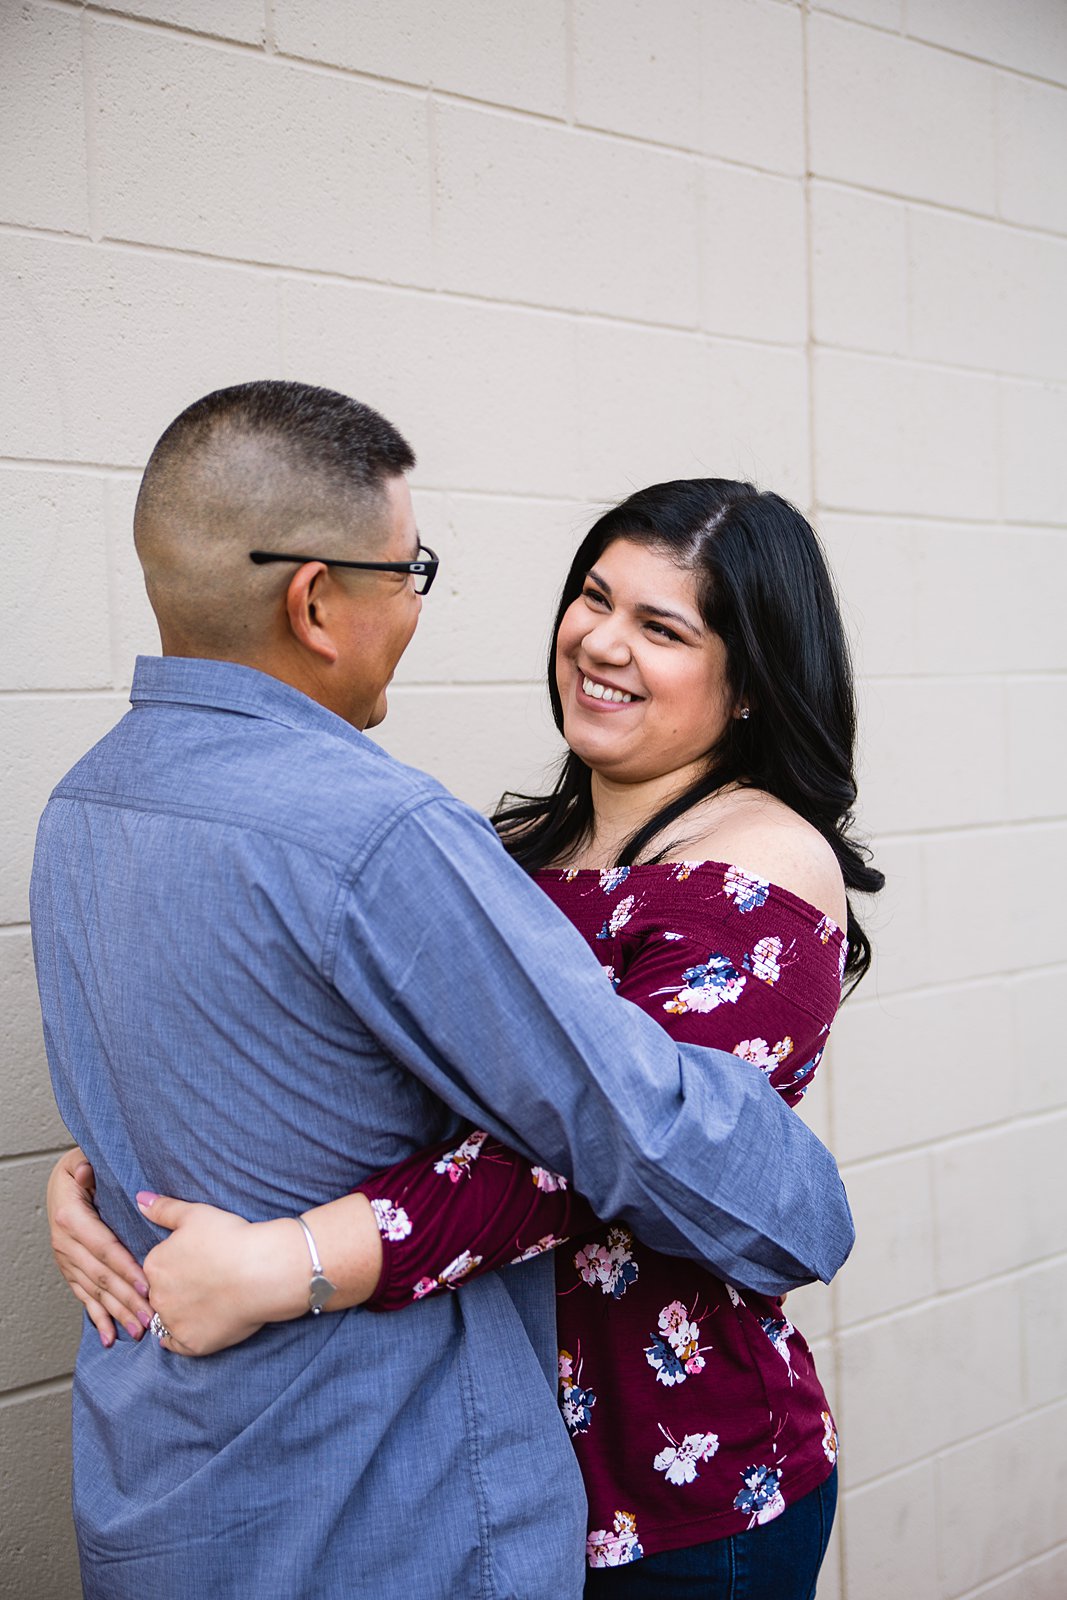 Couple looking at each other against brick wall during their engagement session by Phoenix wedding photographer PMA Photography.